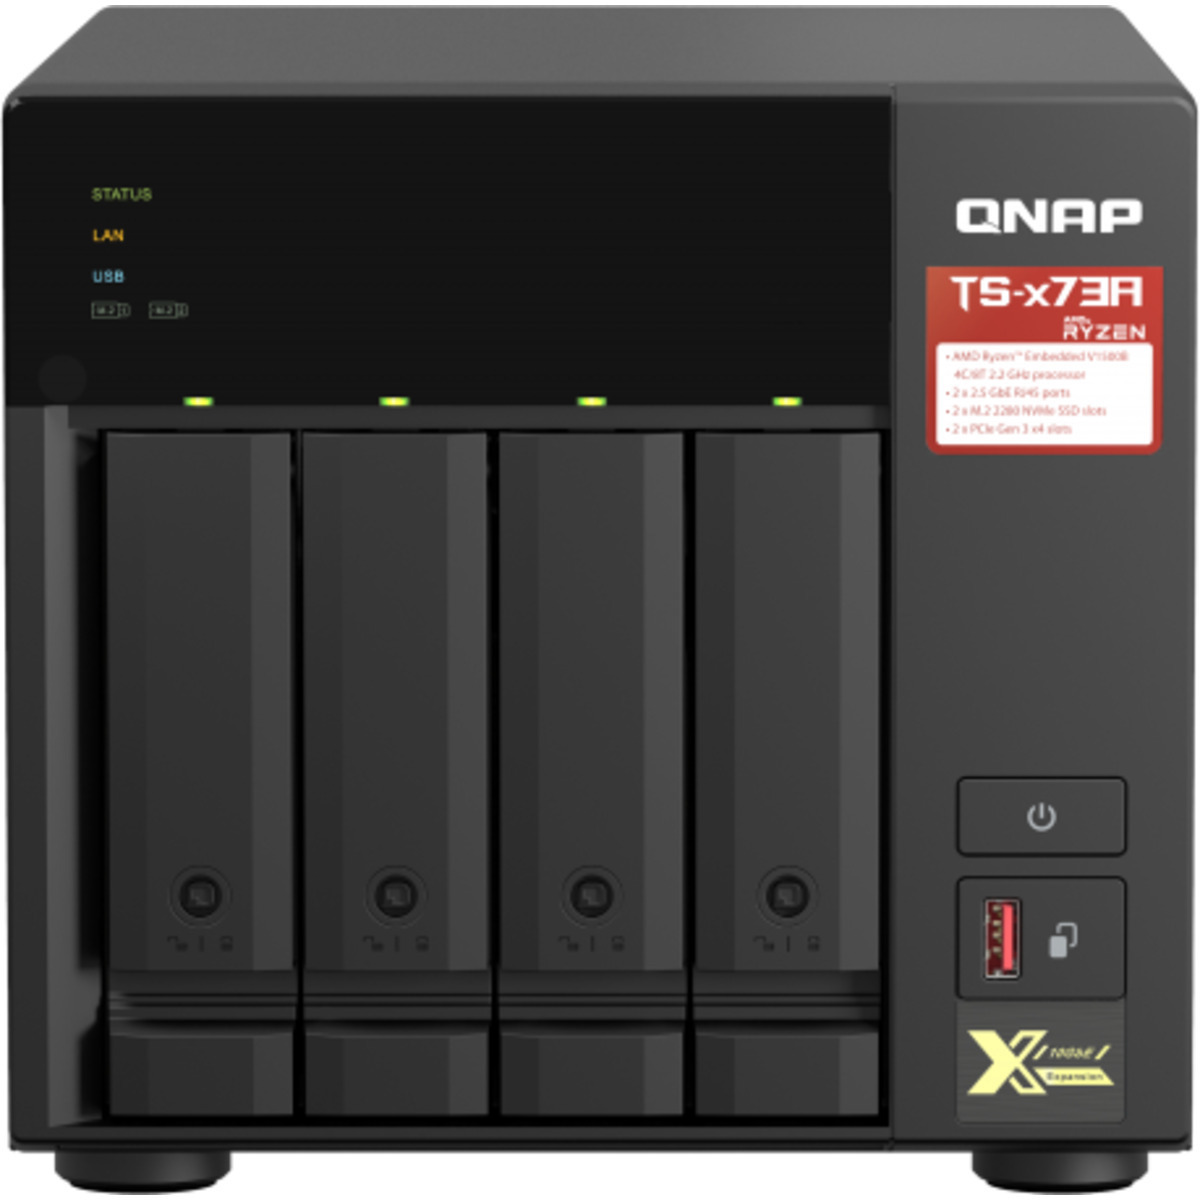 QNAP TS-473A 24tb 4-Bay Desktop Multimedia / Power User / Business NAS - Network Attached Storage Device 3x8tb Western Digital Red Plus WD80EFPX 3.5 7200rpm SATA 6Gb/s HDD NAS Class Drives Installed - Burn-In Tested TS-473A